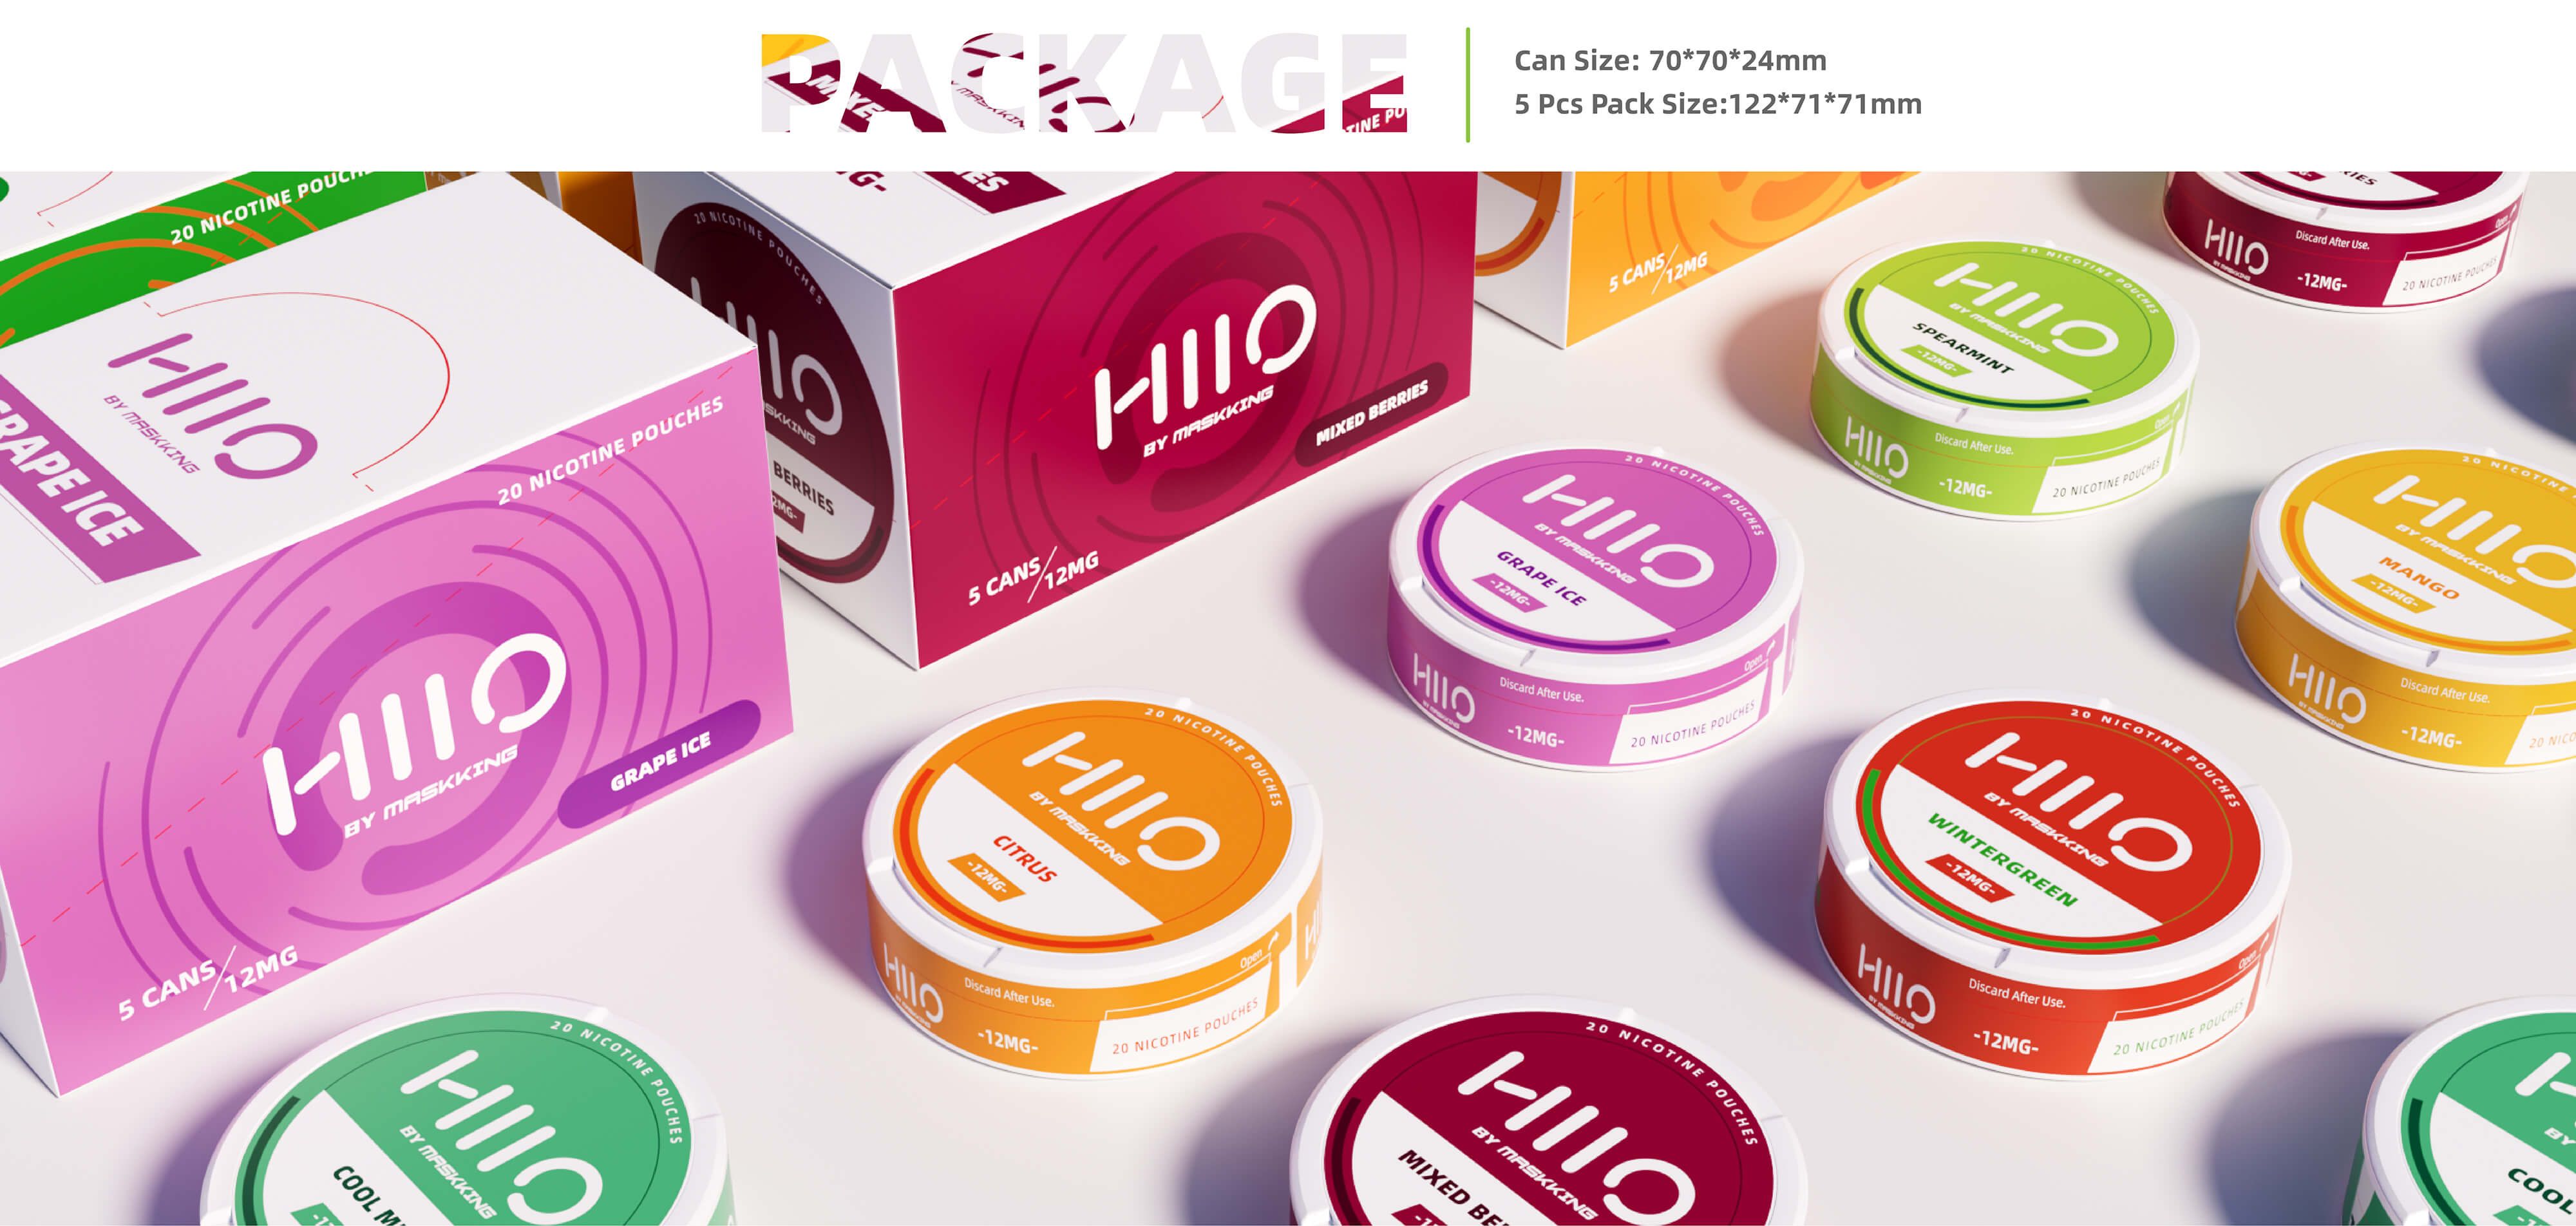 hiio nicotine pouch package